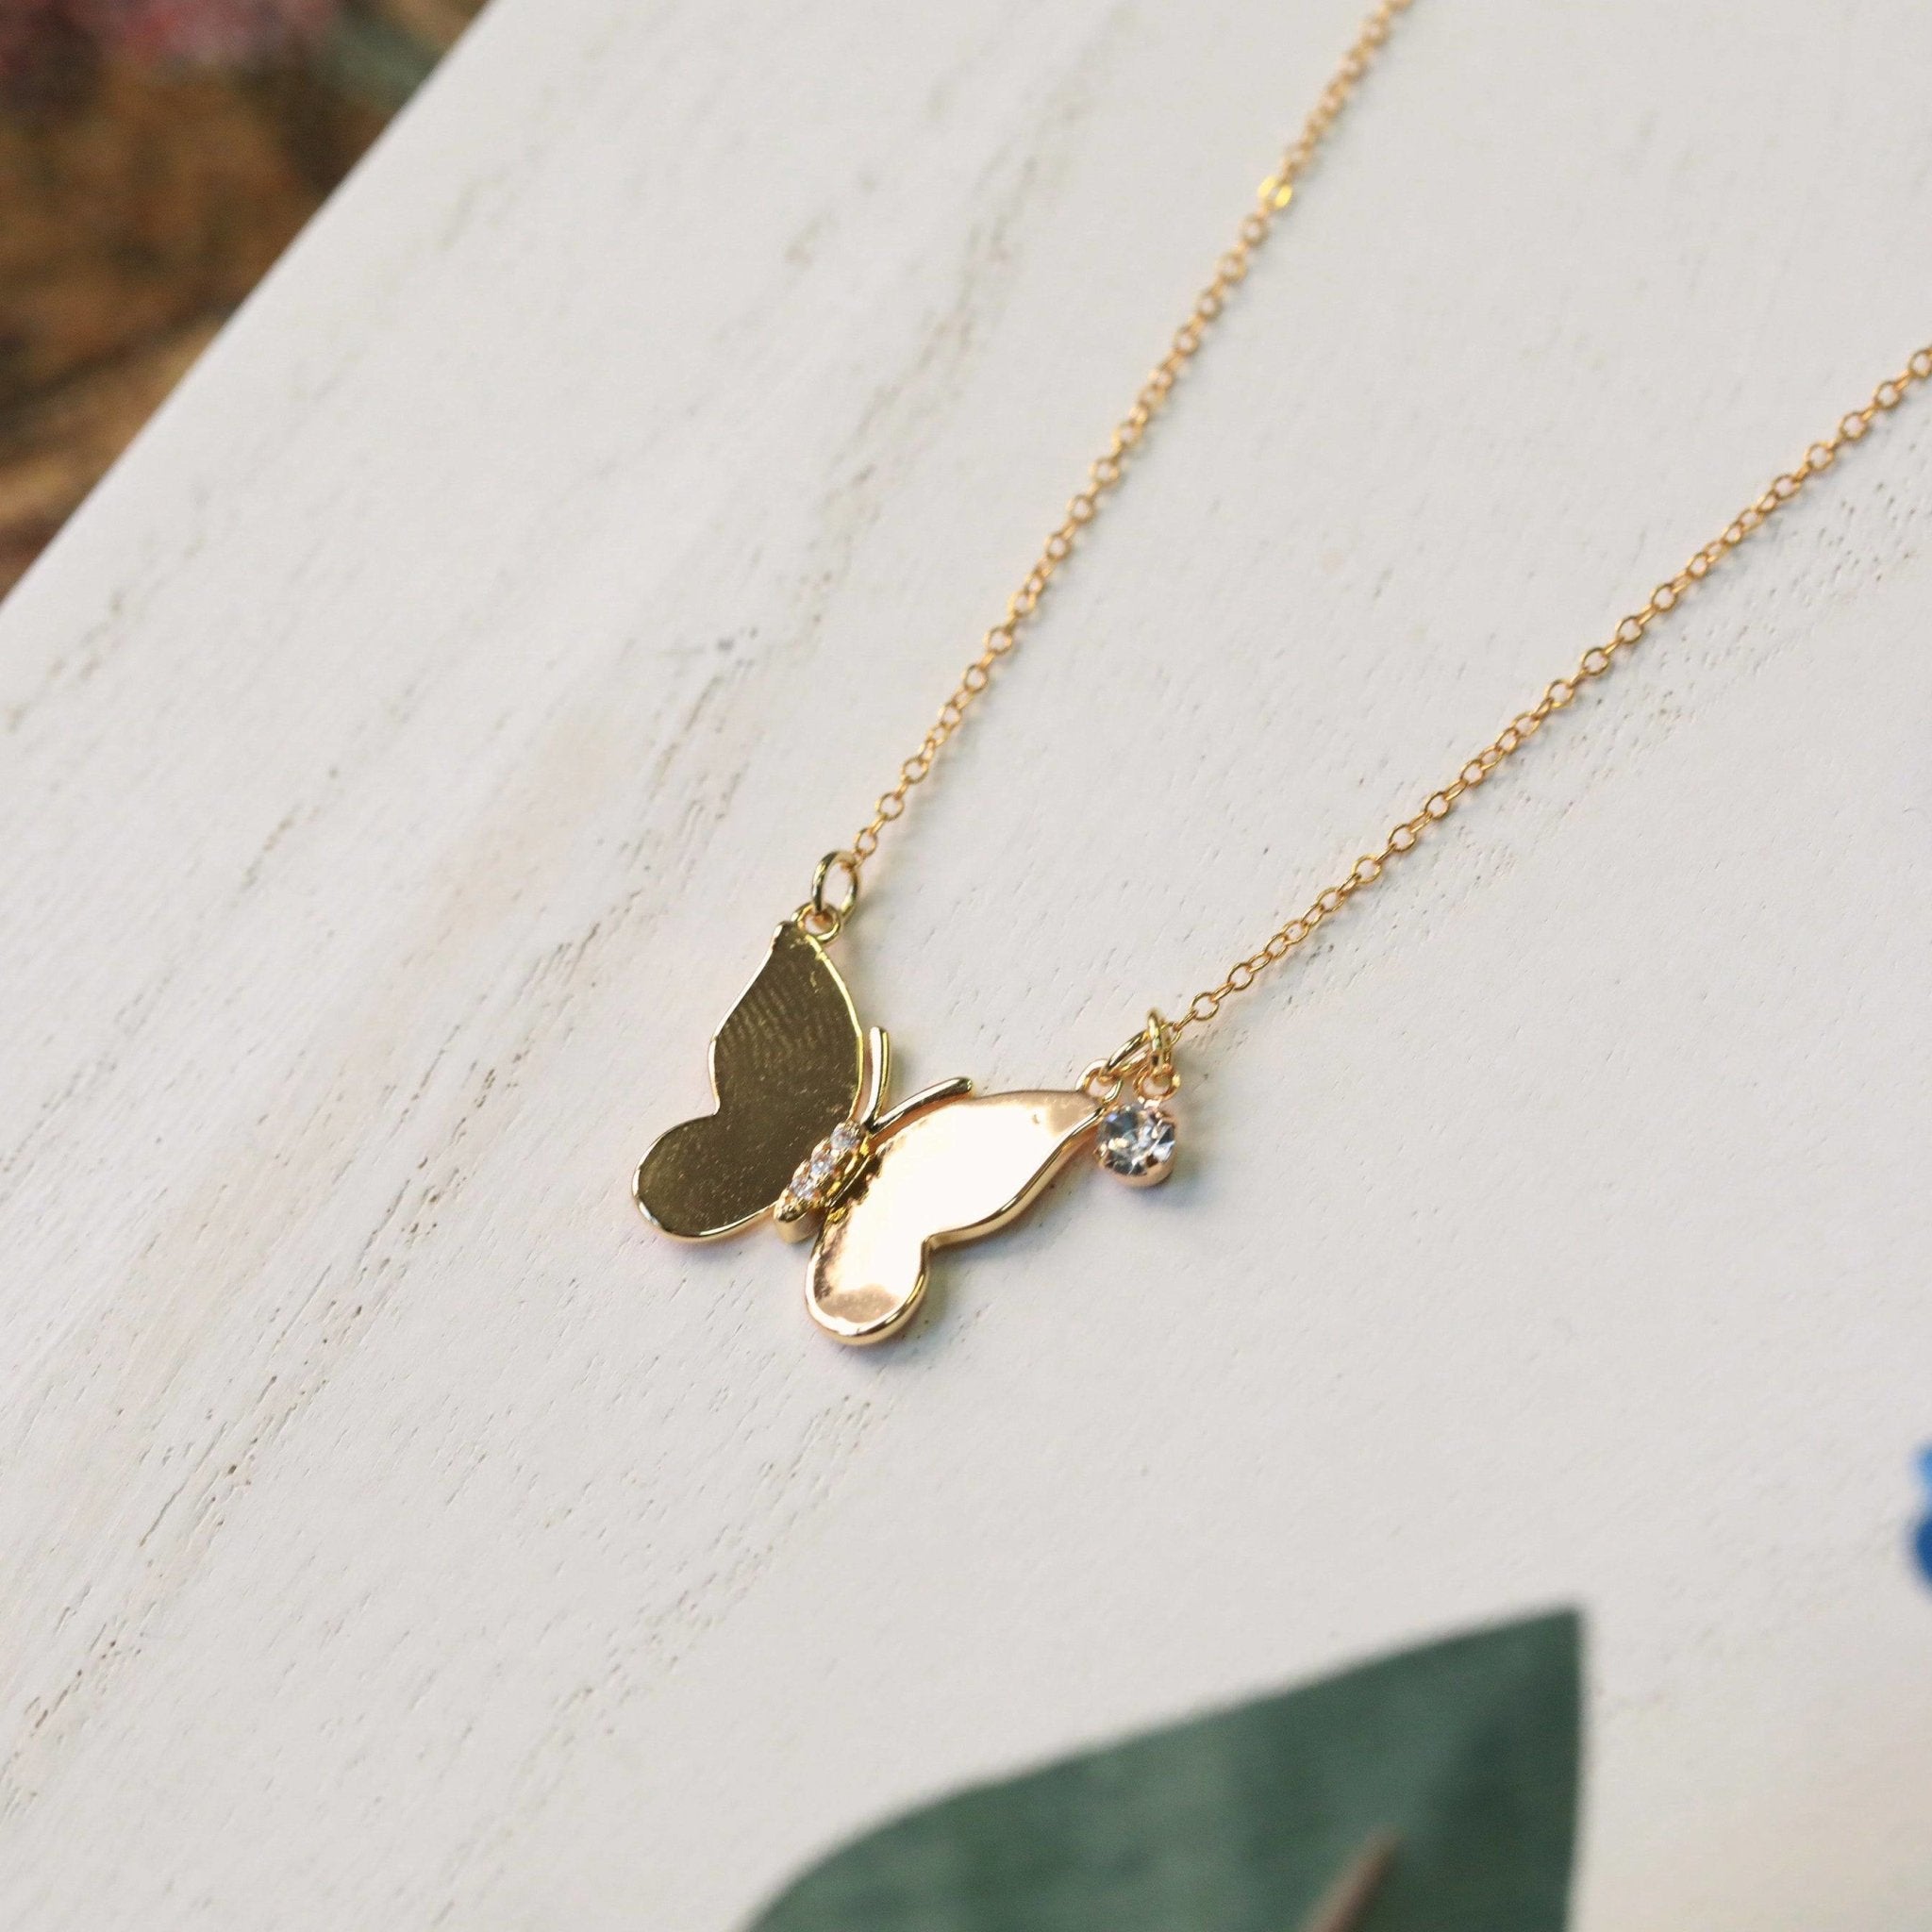 Golden Butterfly Necklace - The Gilded Witch